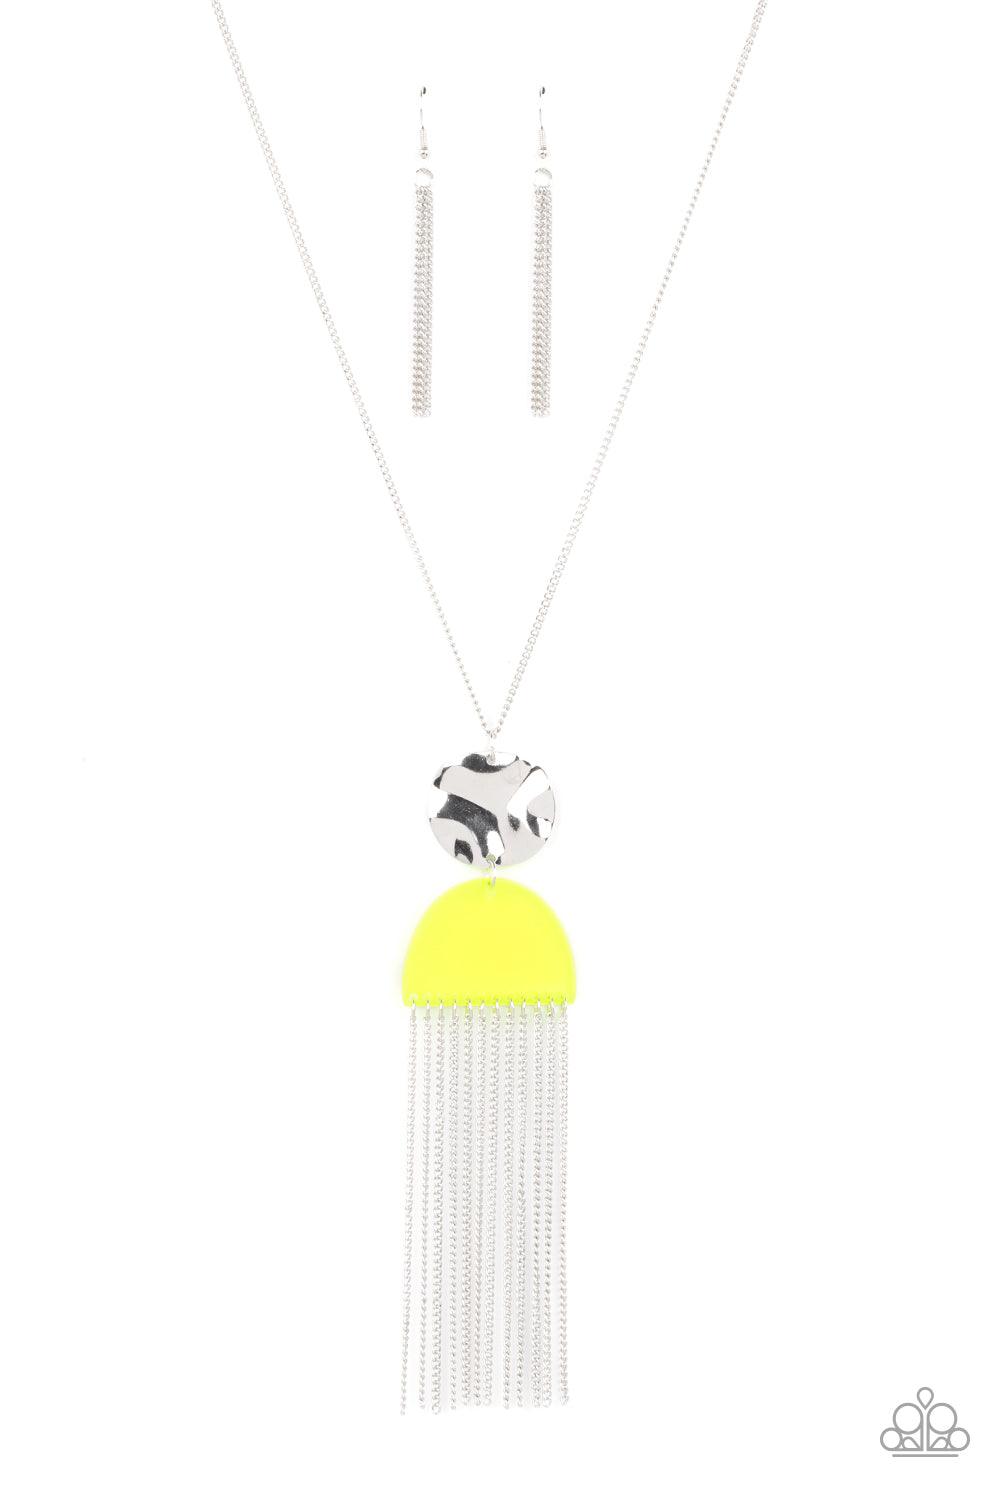 Paparazzi Accessories Color Me Neon - Yellow A hammered silver disc connects to a neon yellow half moon acrylic frame at the bottom of a lengthened silver chain. A curtain of shimmery chains stream from the bottom of the stacked pendant, adding flirtatiou